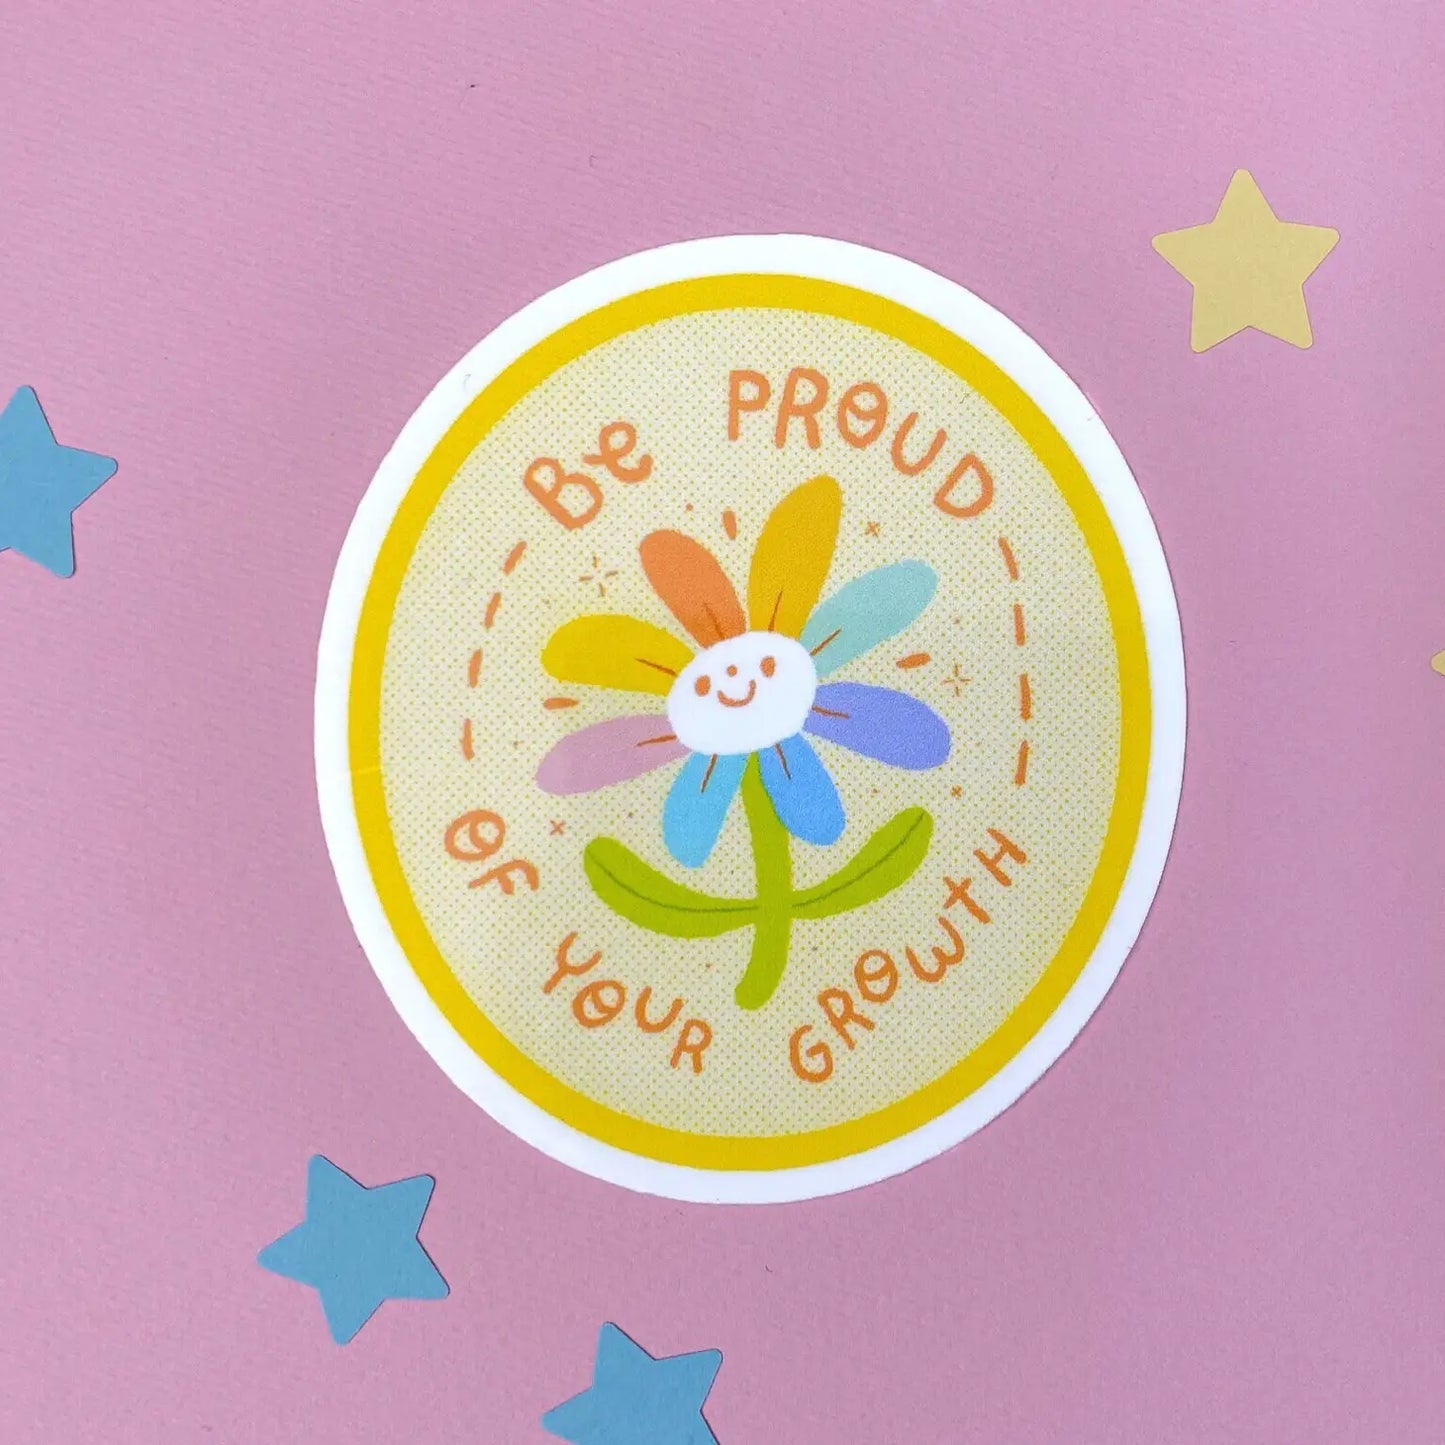 Be Proud of Your Growth Flower Vinyl Sticker